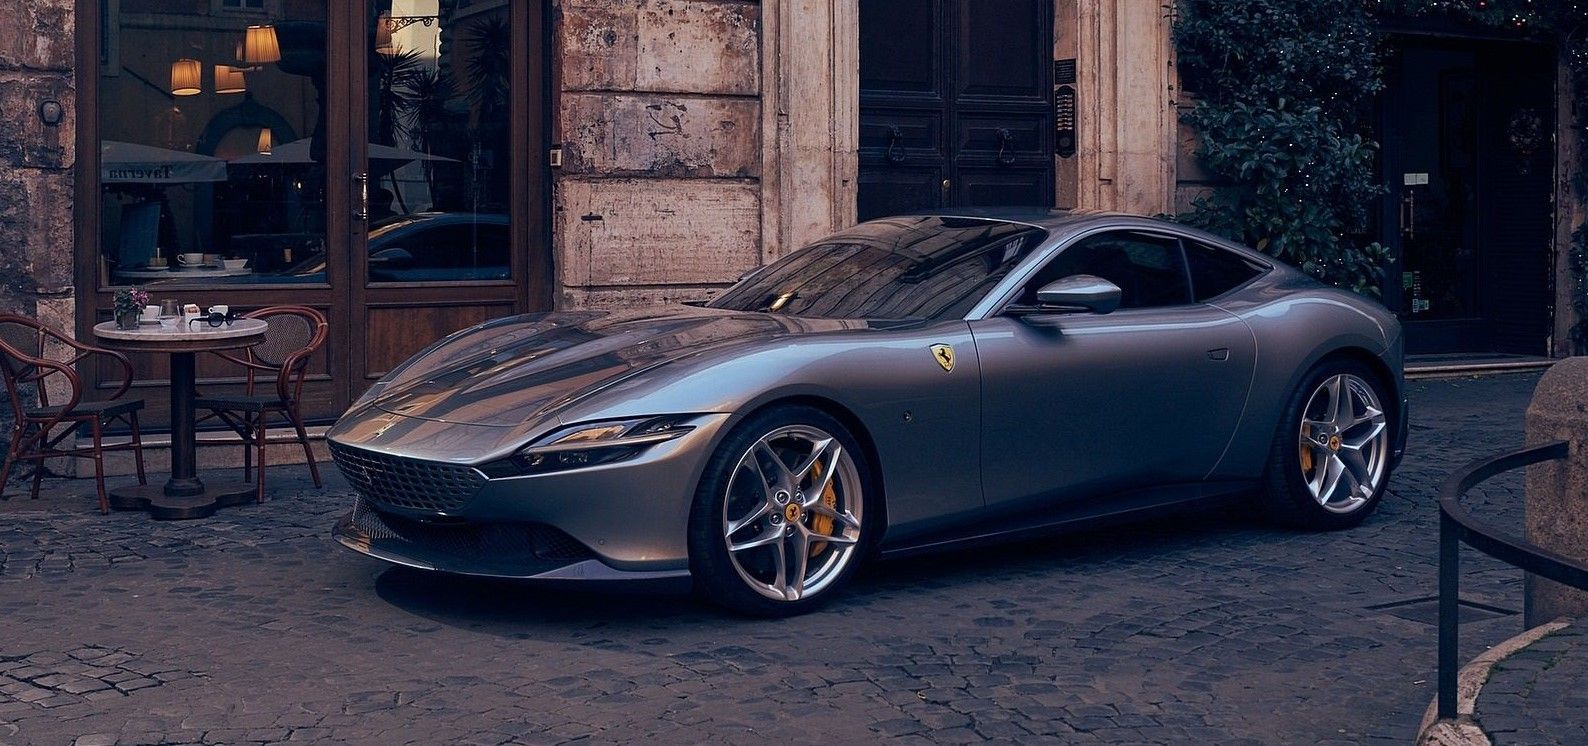 Ferrari Roma Price, Review, Ratings and Picture